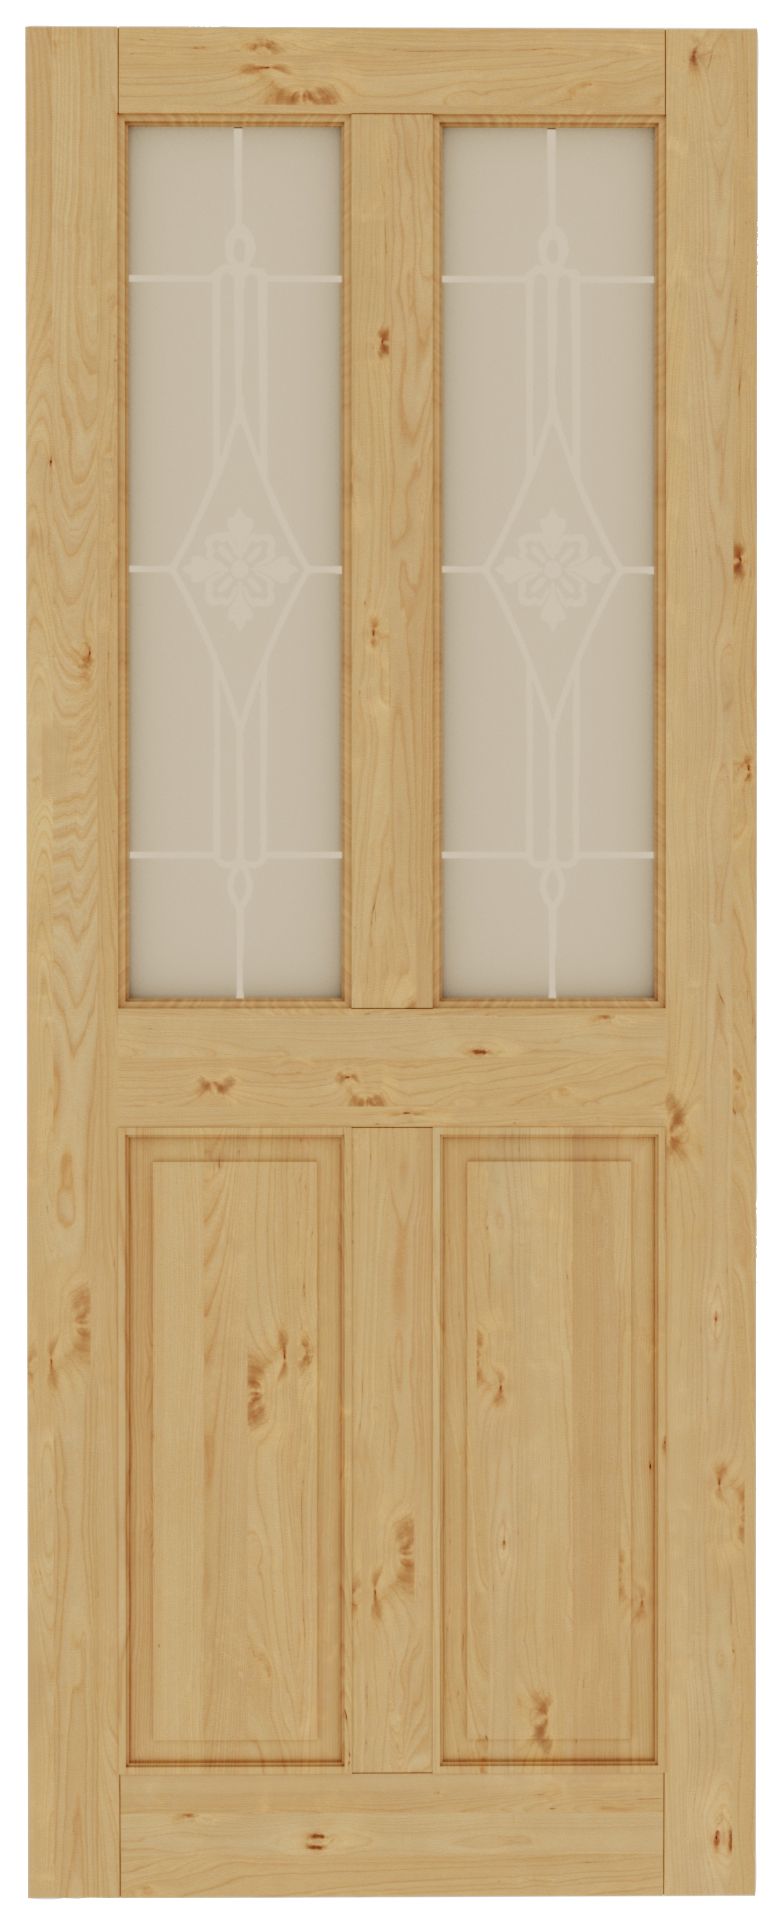 Image of Wickes Chester 4 Panel Knotty Pine Glazed Door - 1981 x 762mm